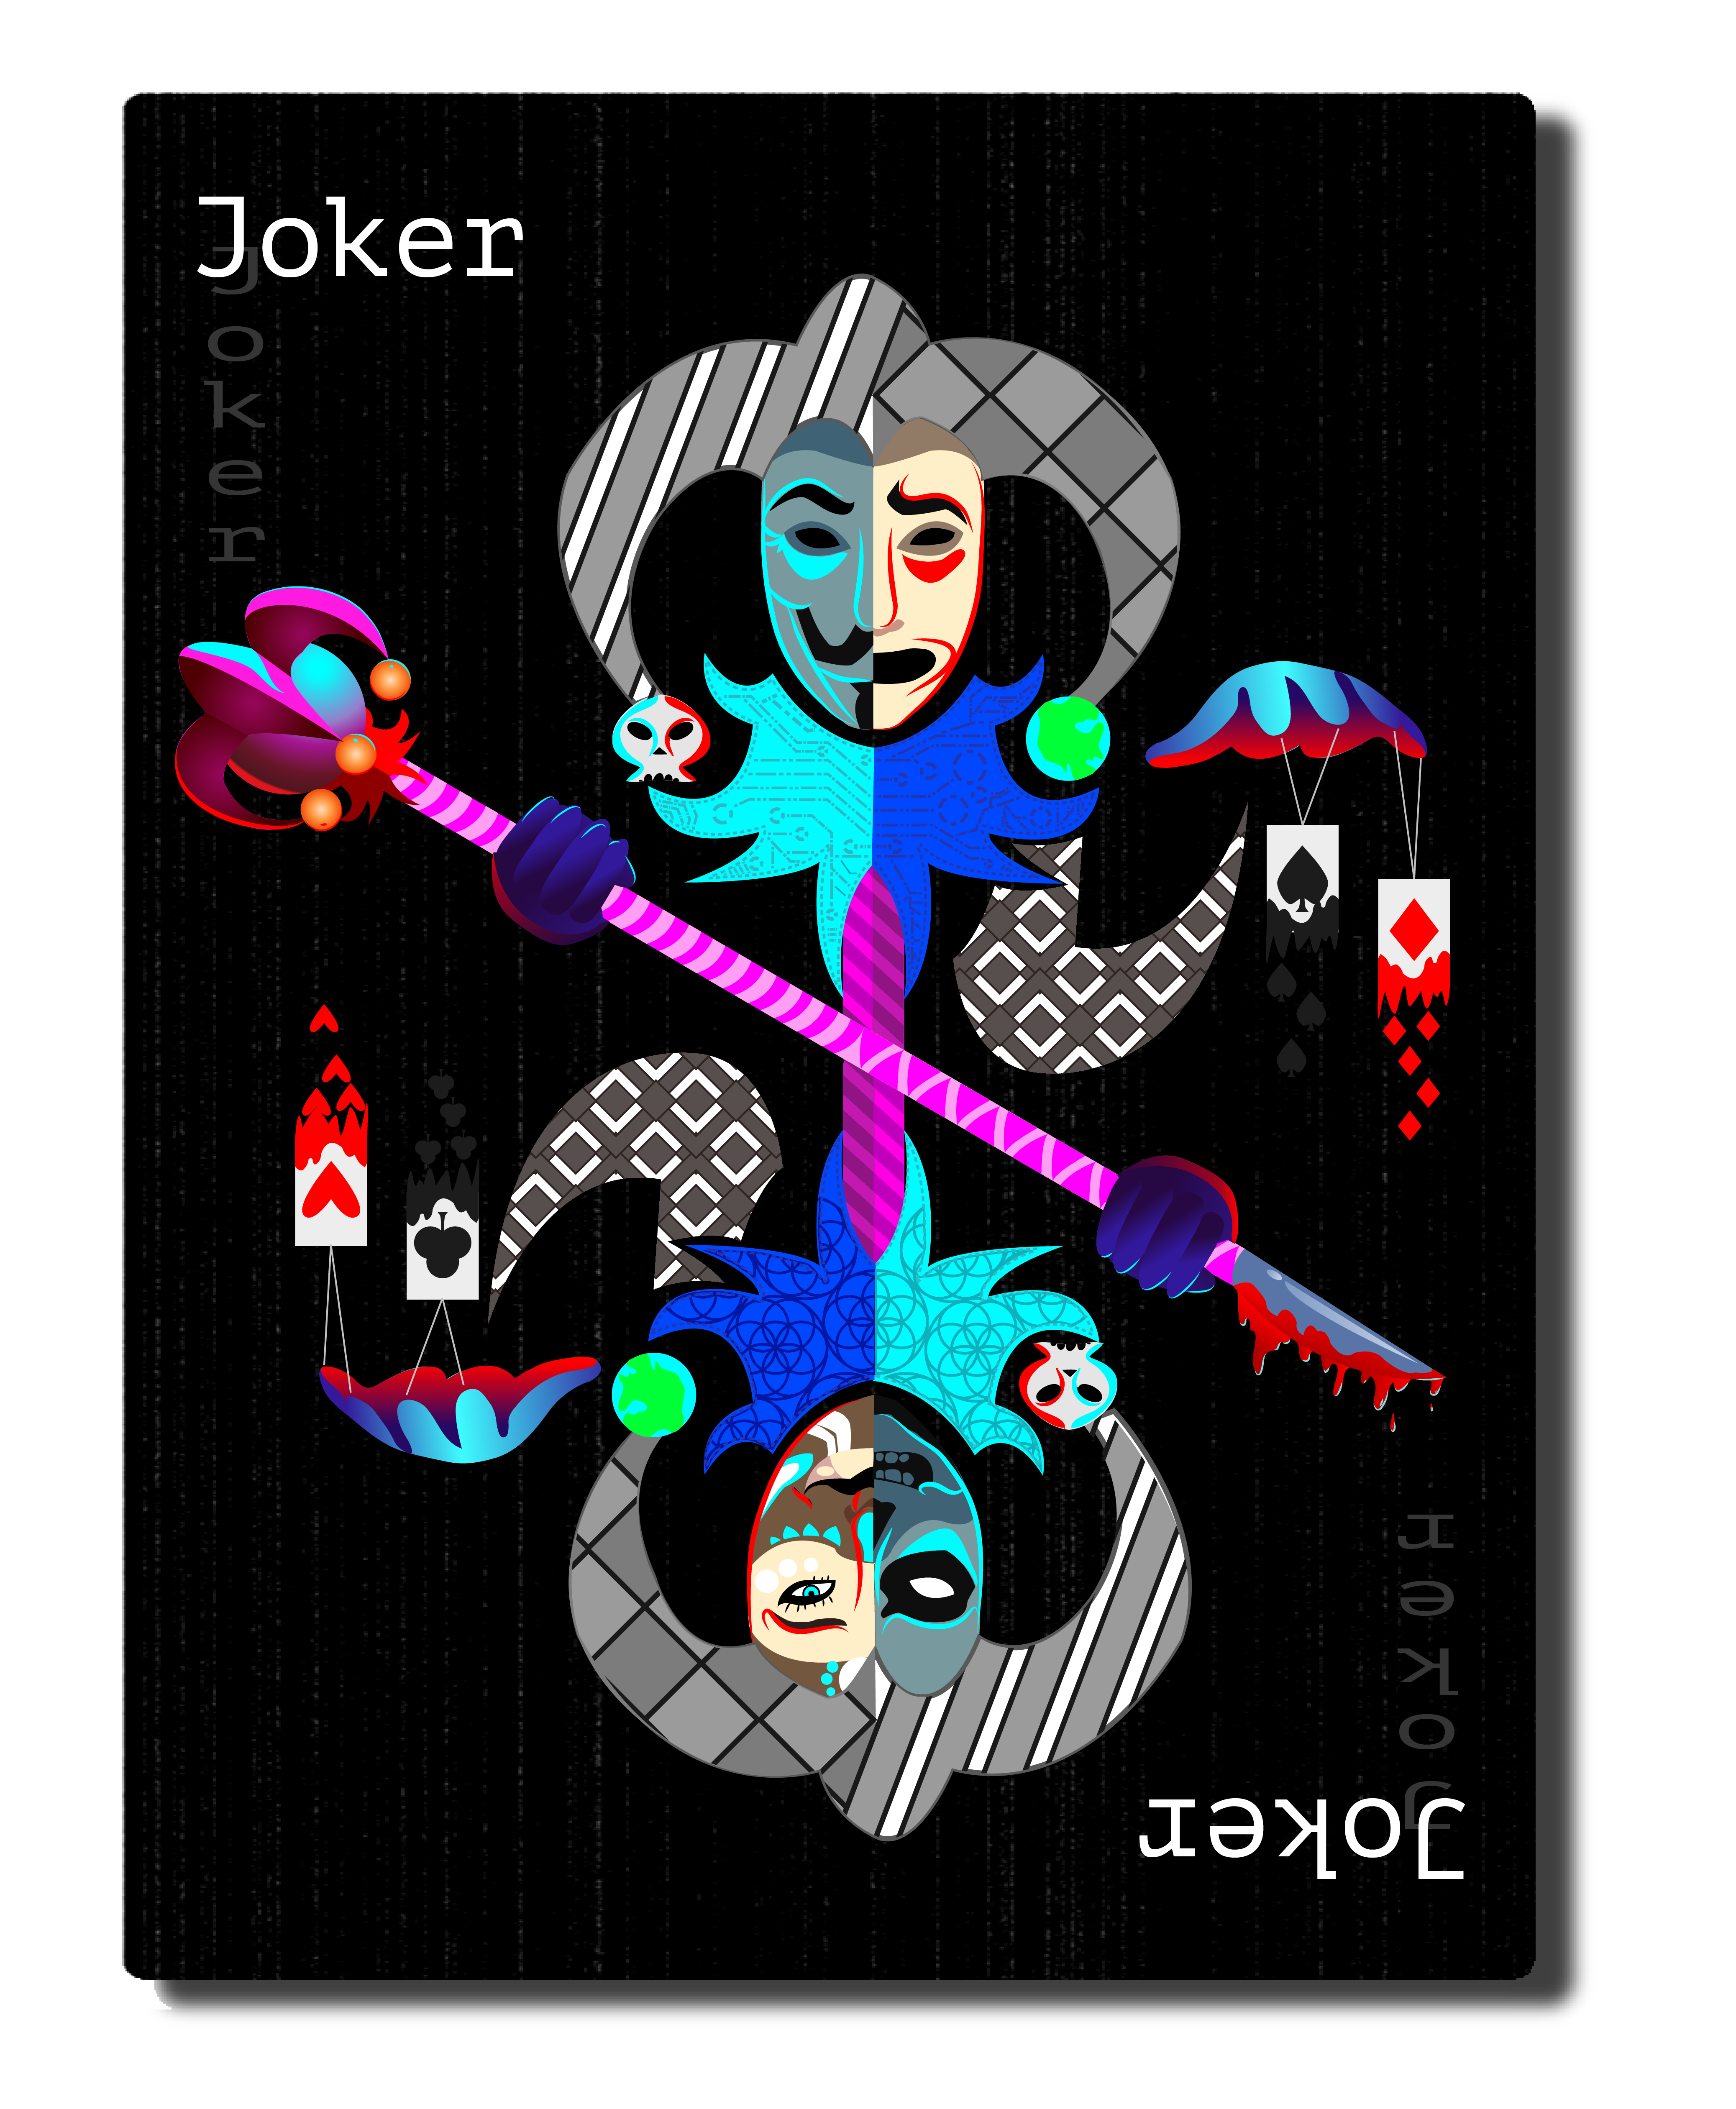 Playing card project - Joker cardfinal rendering